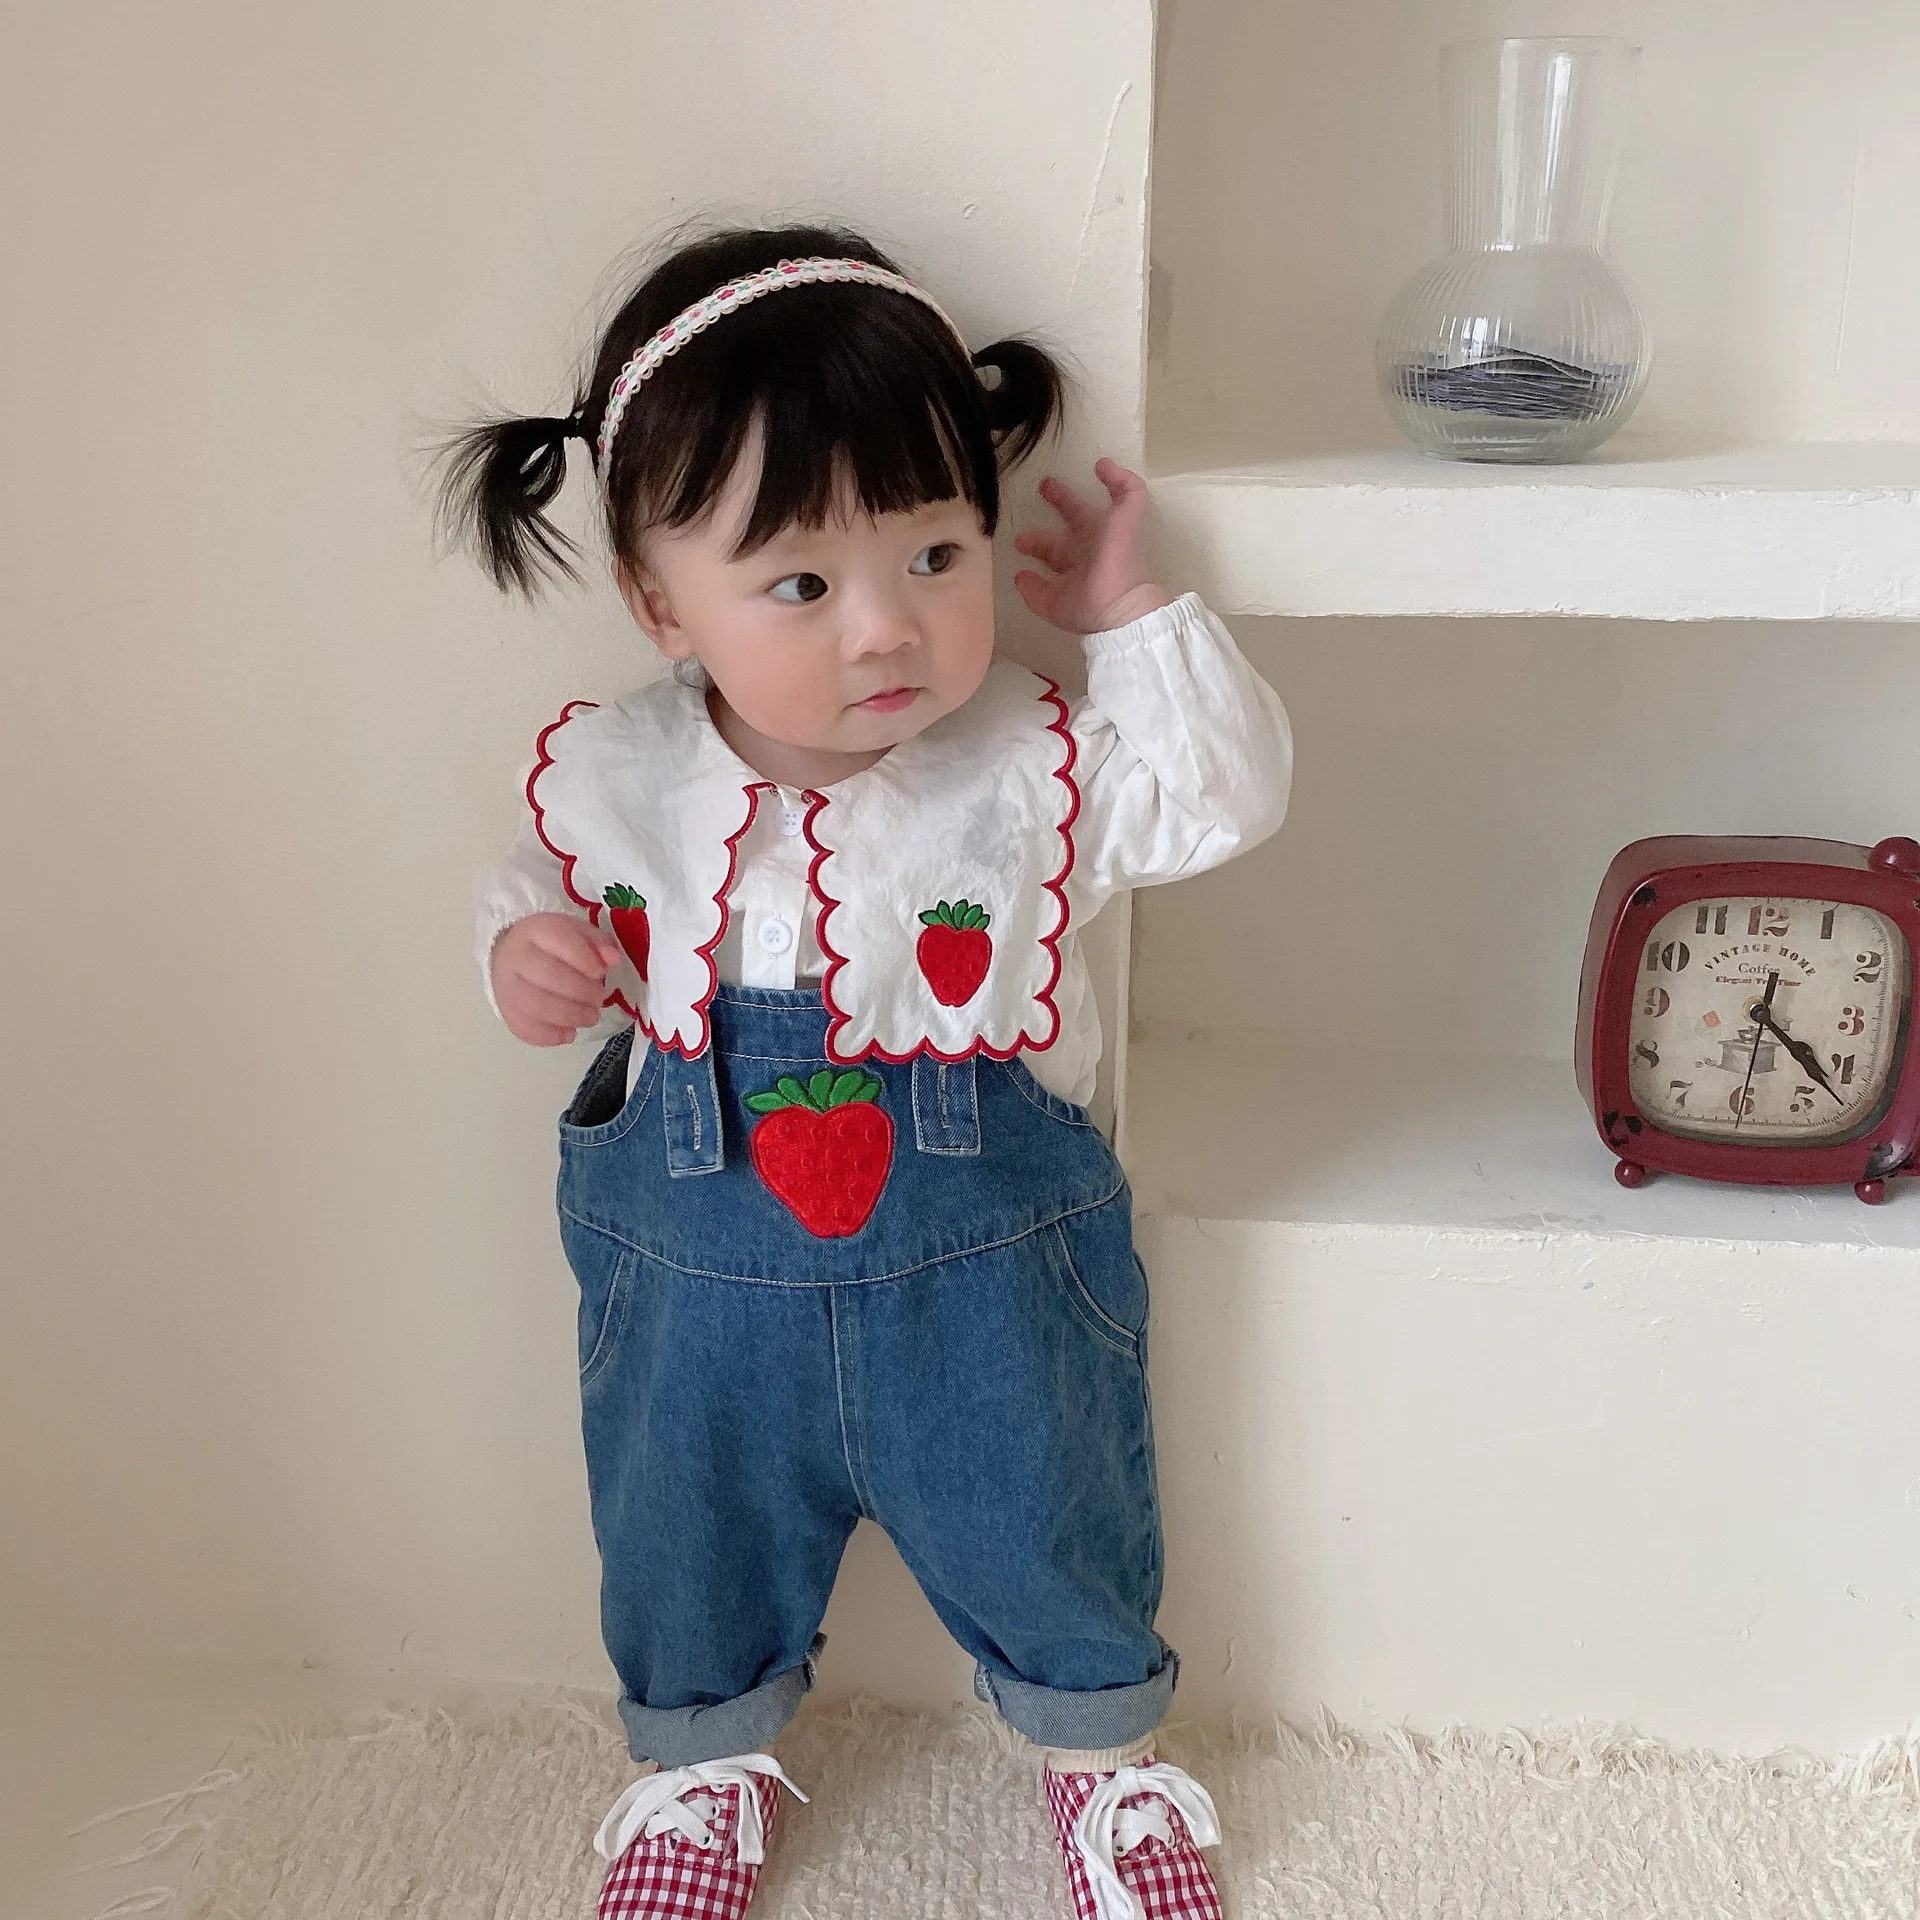 

2022 Spring New Baby Girl Denim Overalls Cute Strawberry Print Little Girls Strap Pants Infant Toddler Jean Overalls Clothes